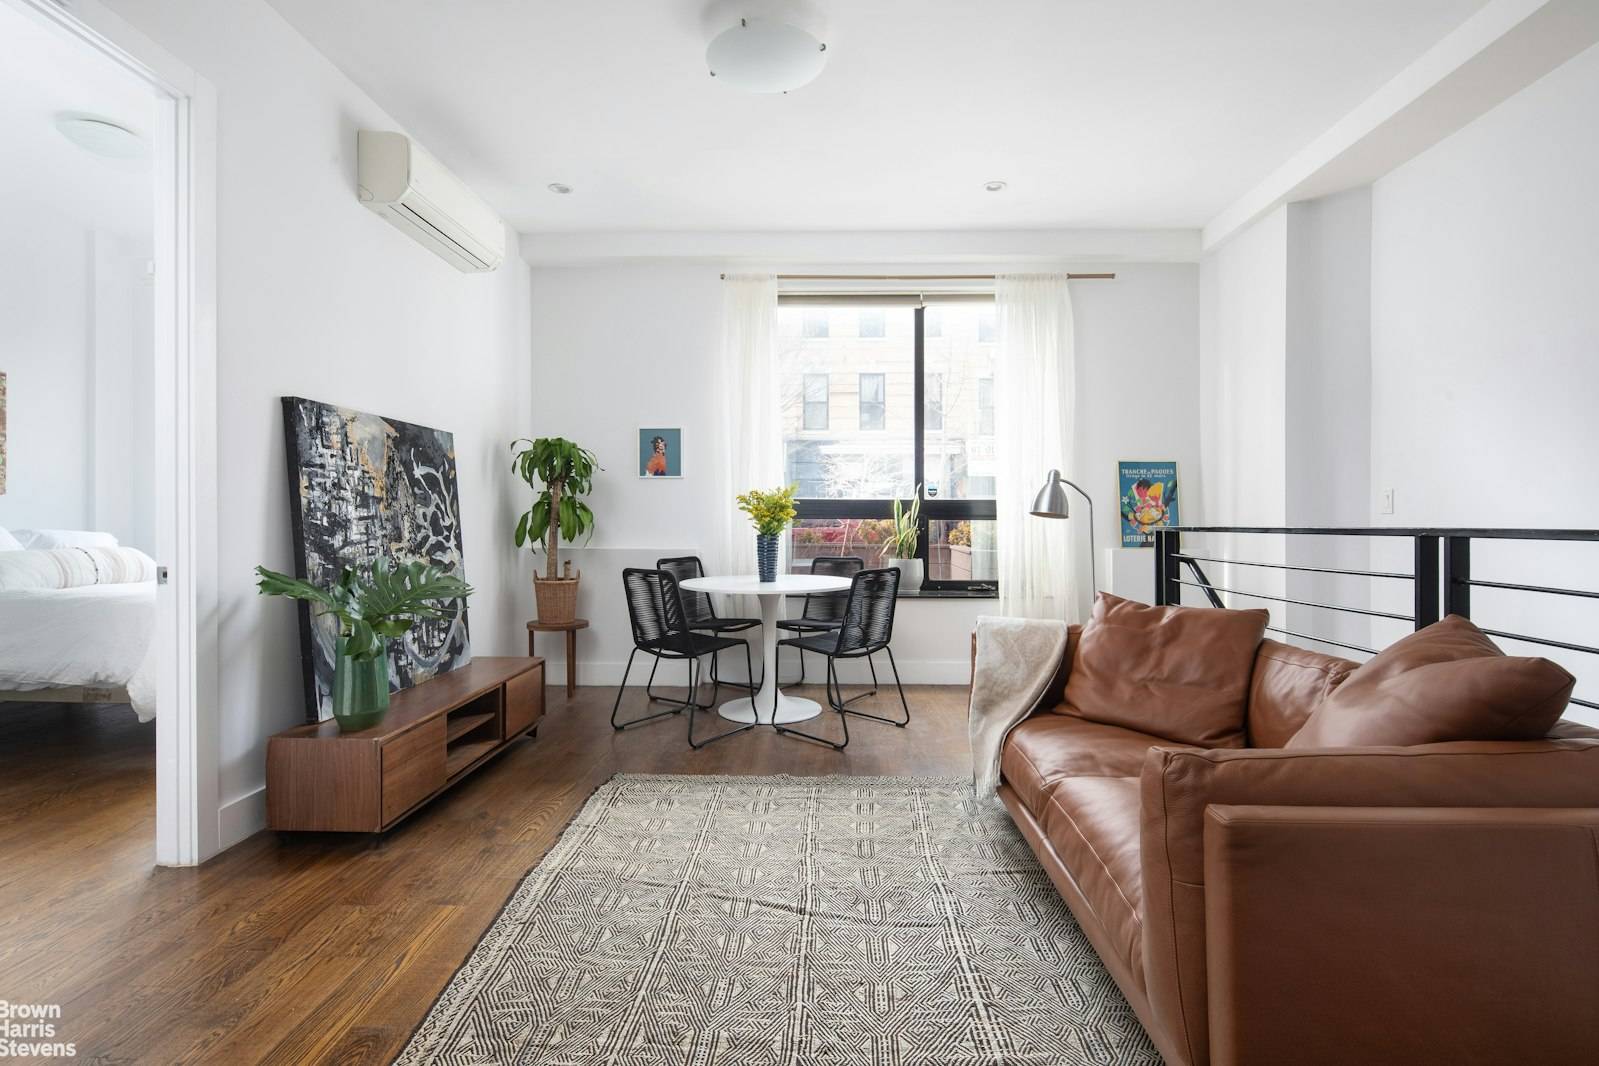 Welcome to 655 Franklin Avenue, 1F, a cozy, pet friendly condominium duplex apartment in vibrant Crown Heights.